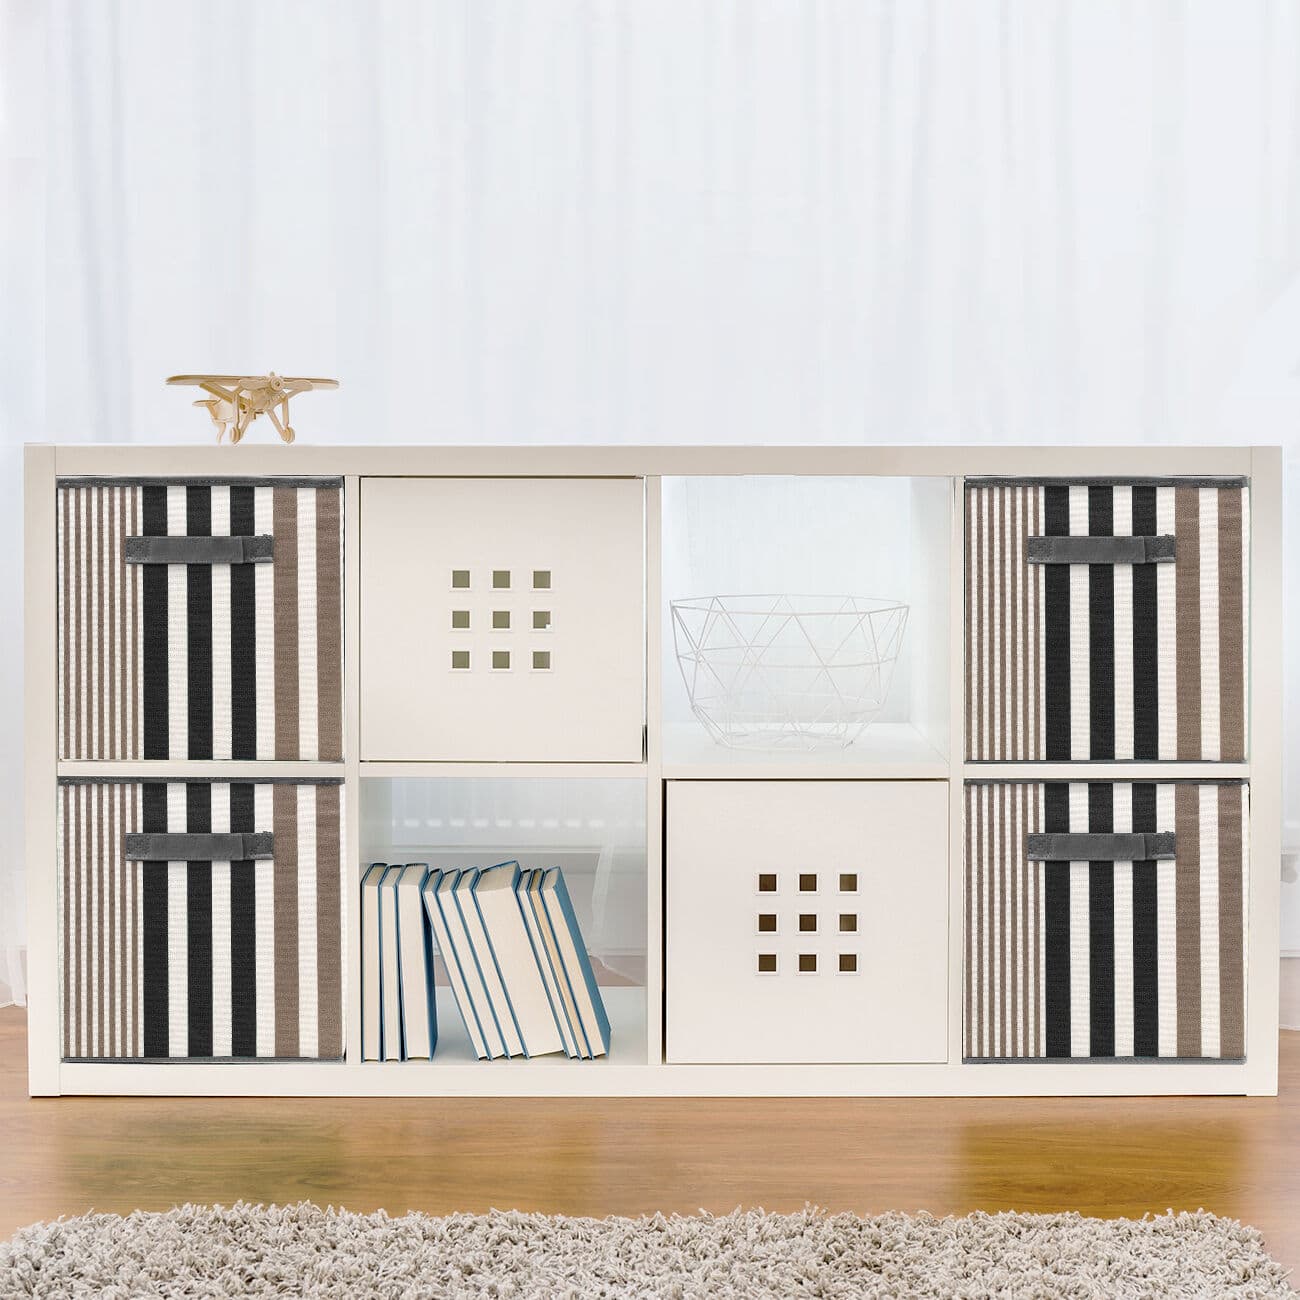 A white storage unit with black and white striped baskets.